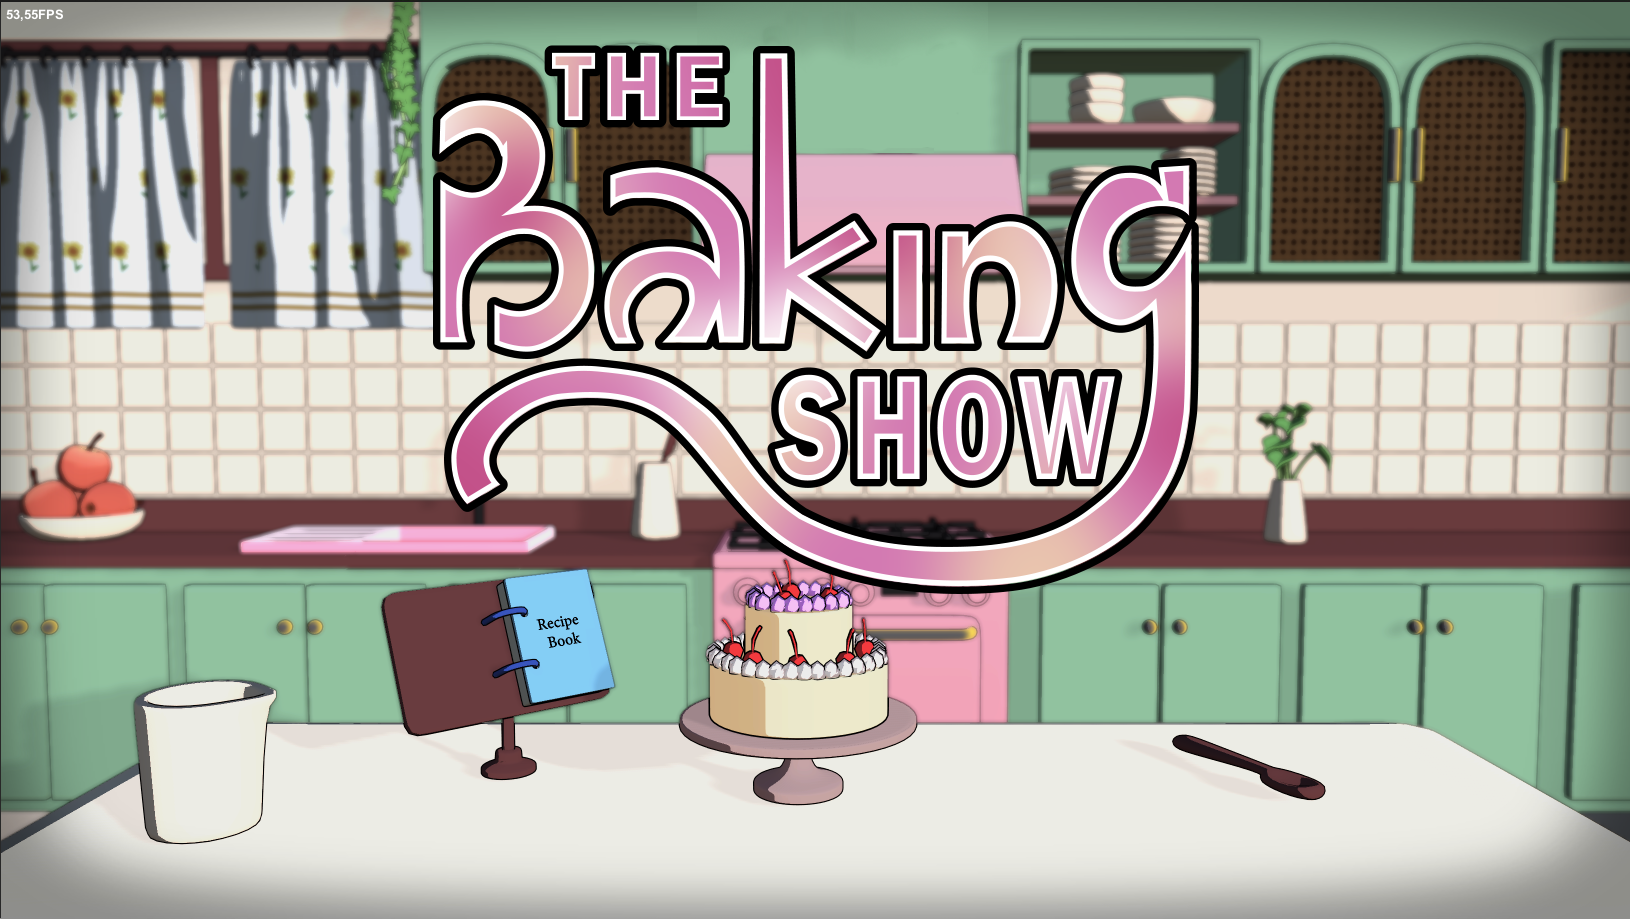 The Baking Show